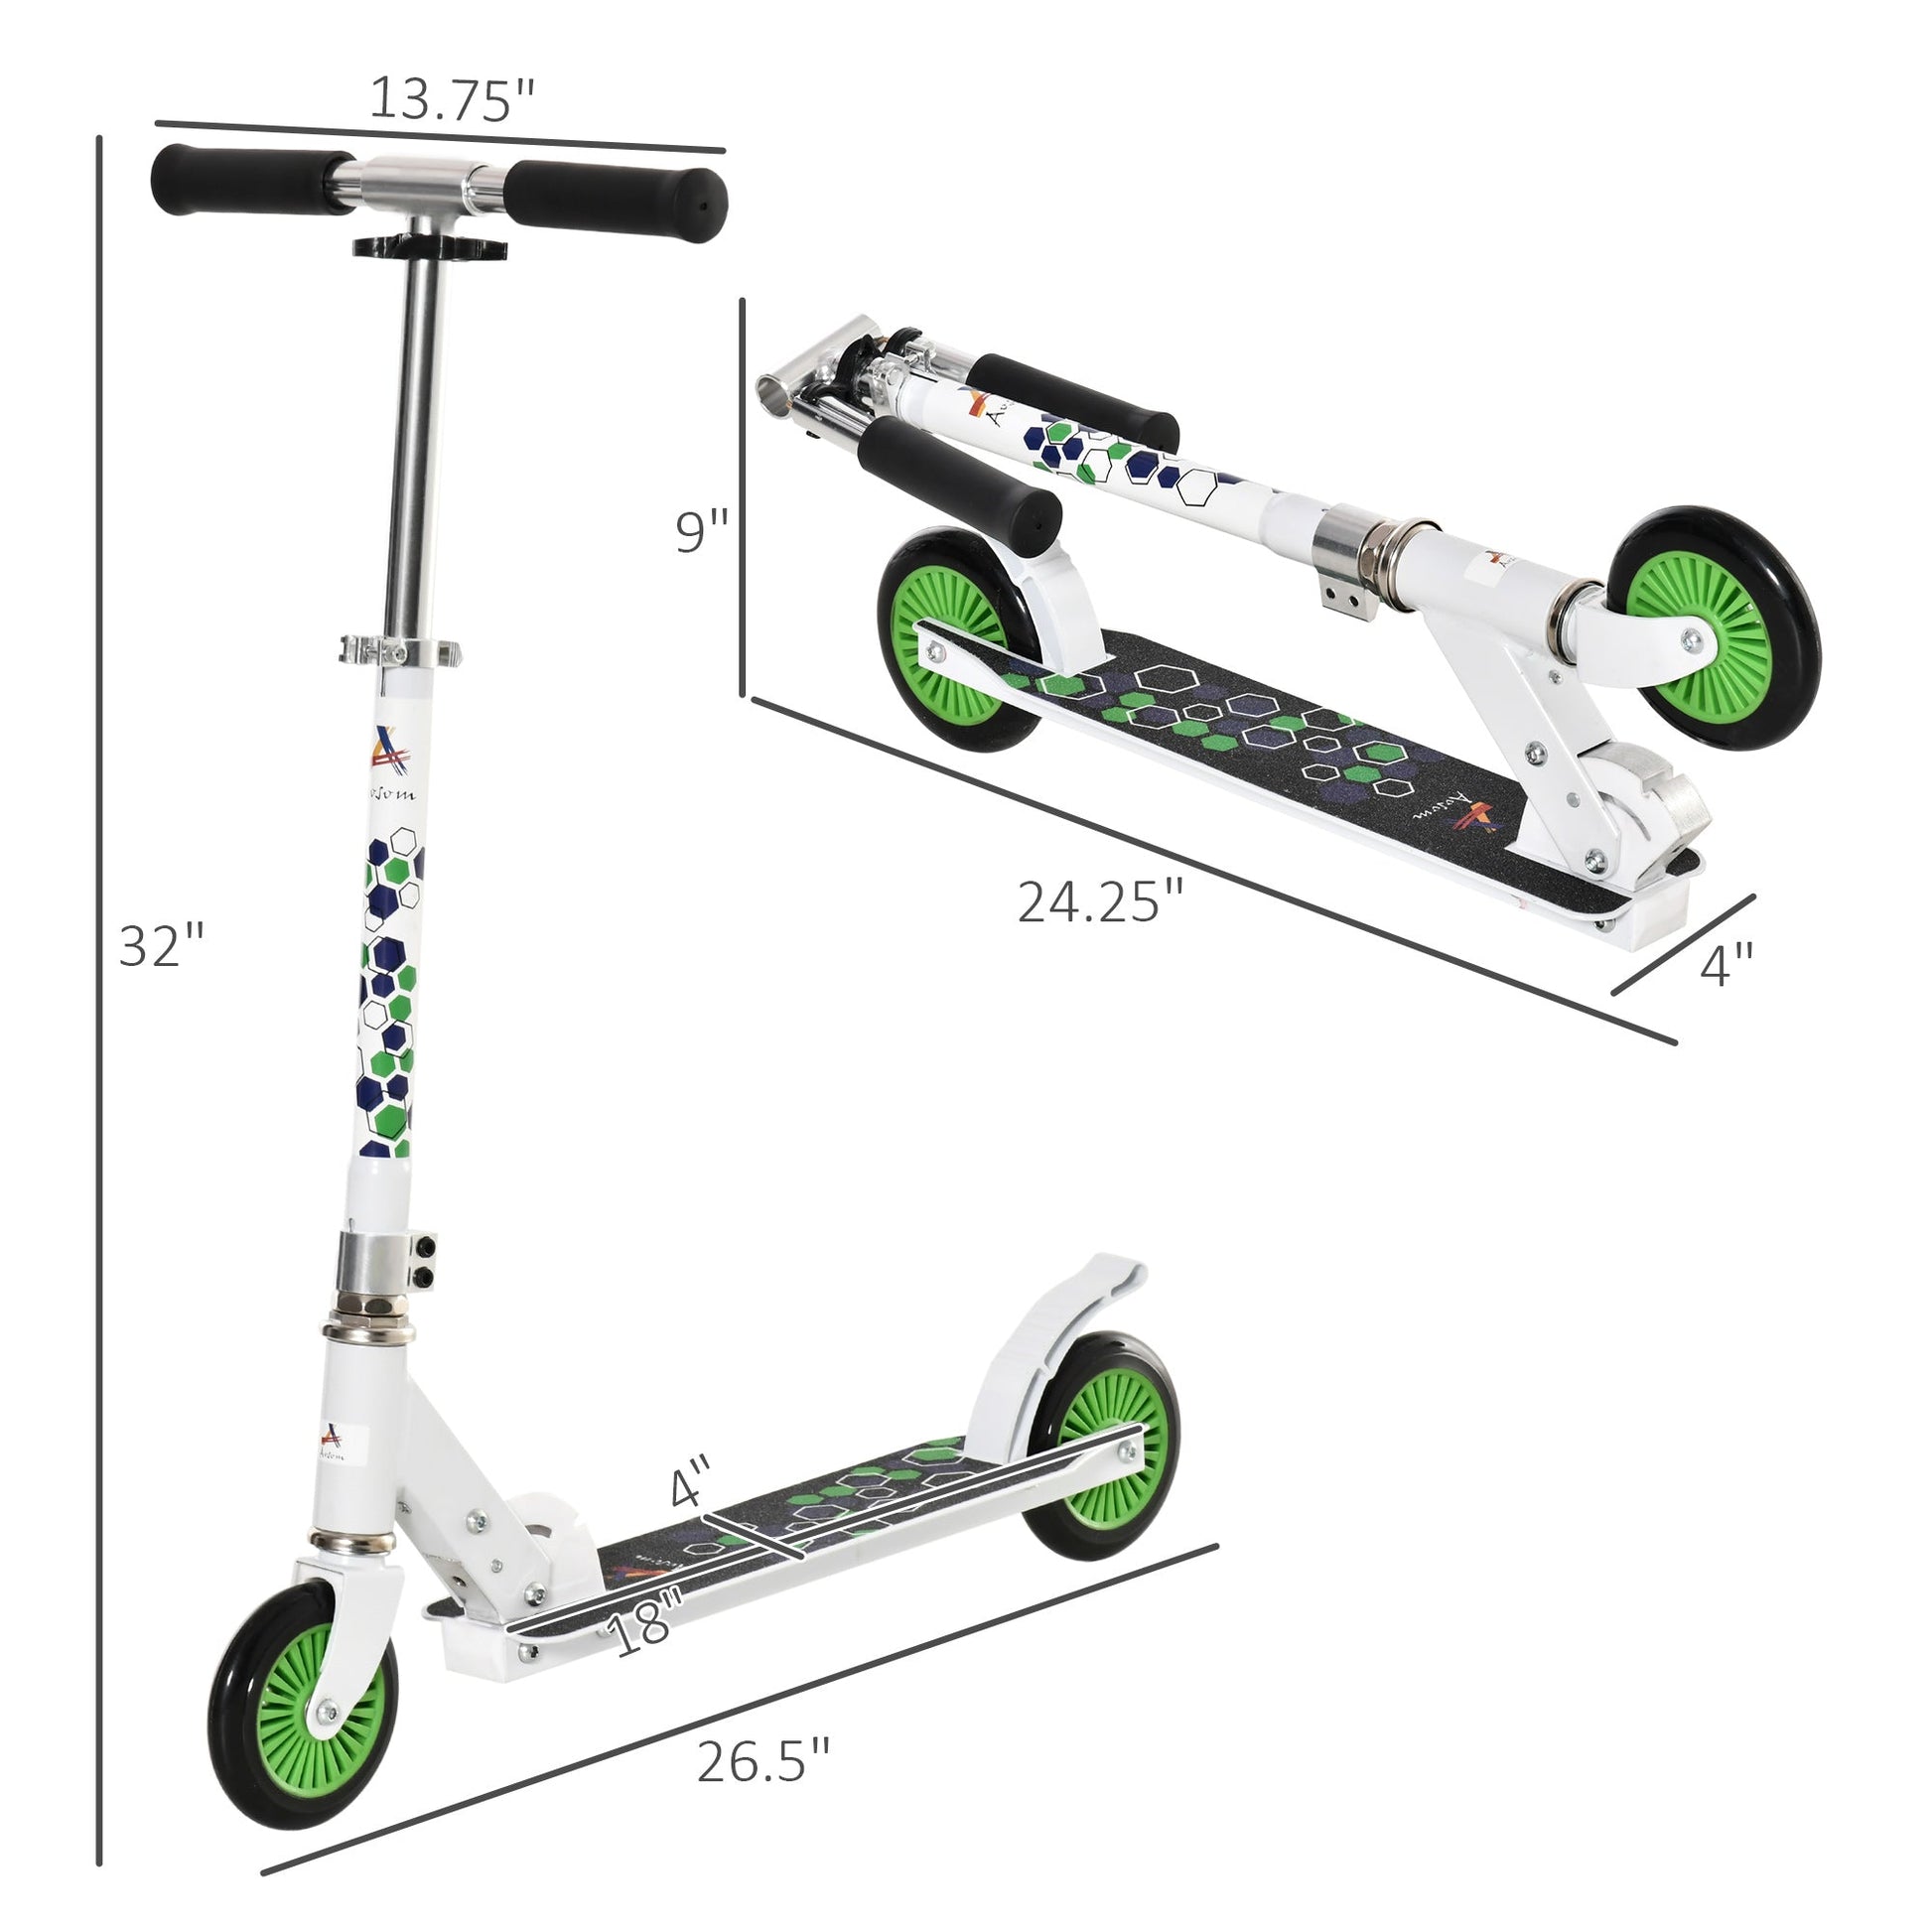 Youth Kick Scooter One-Click Foldable Teens Ride On Toy with Adjustable Handlebar Rear Brake for Boys and Girls Aluminium White at Gallery Canada